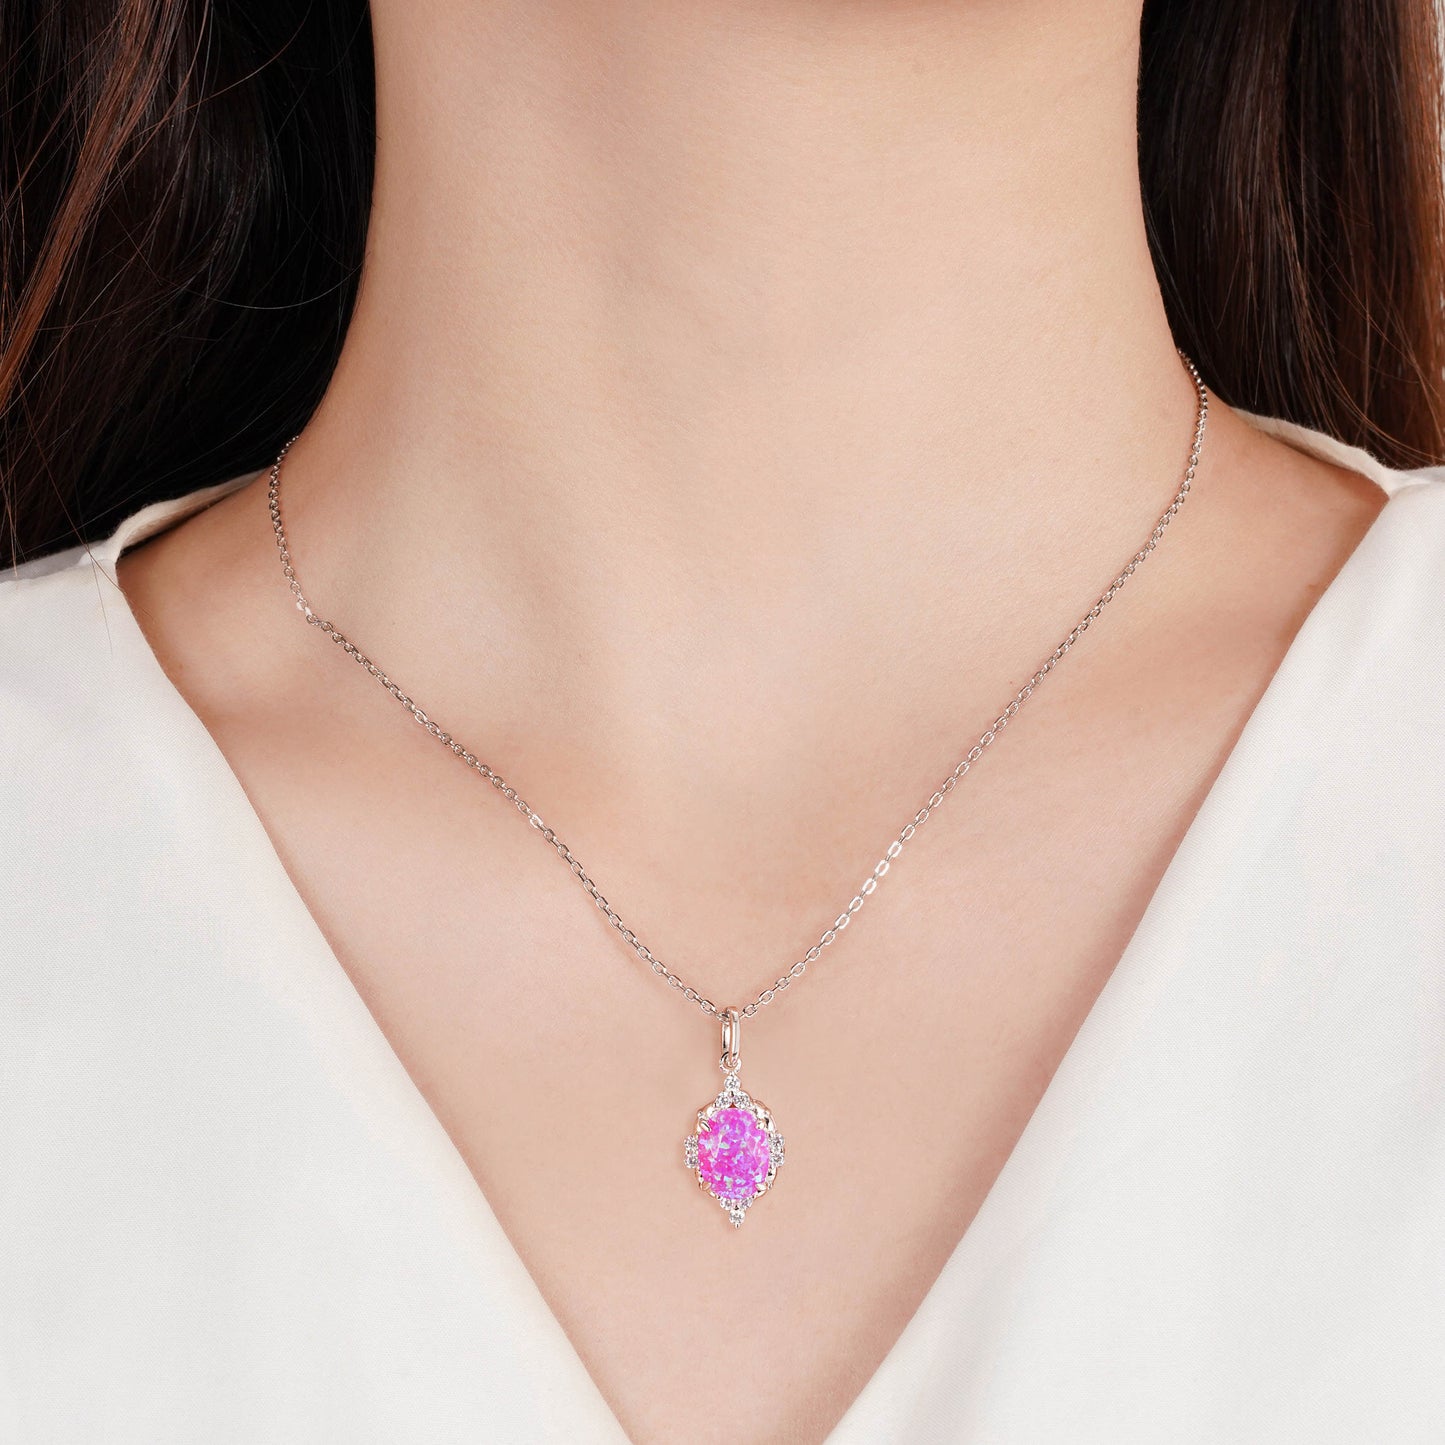 Brya Orchard Pink Opal Necklace